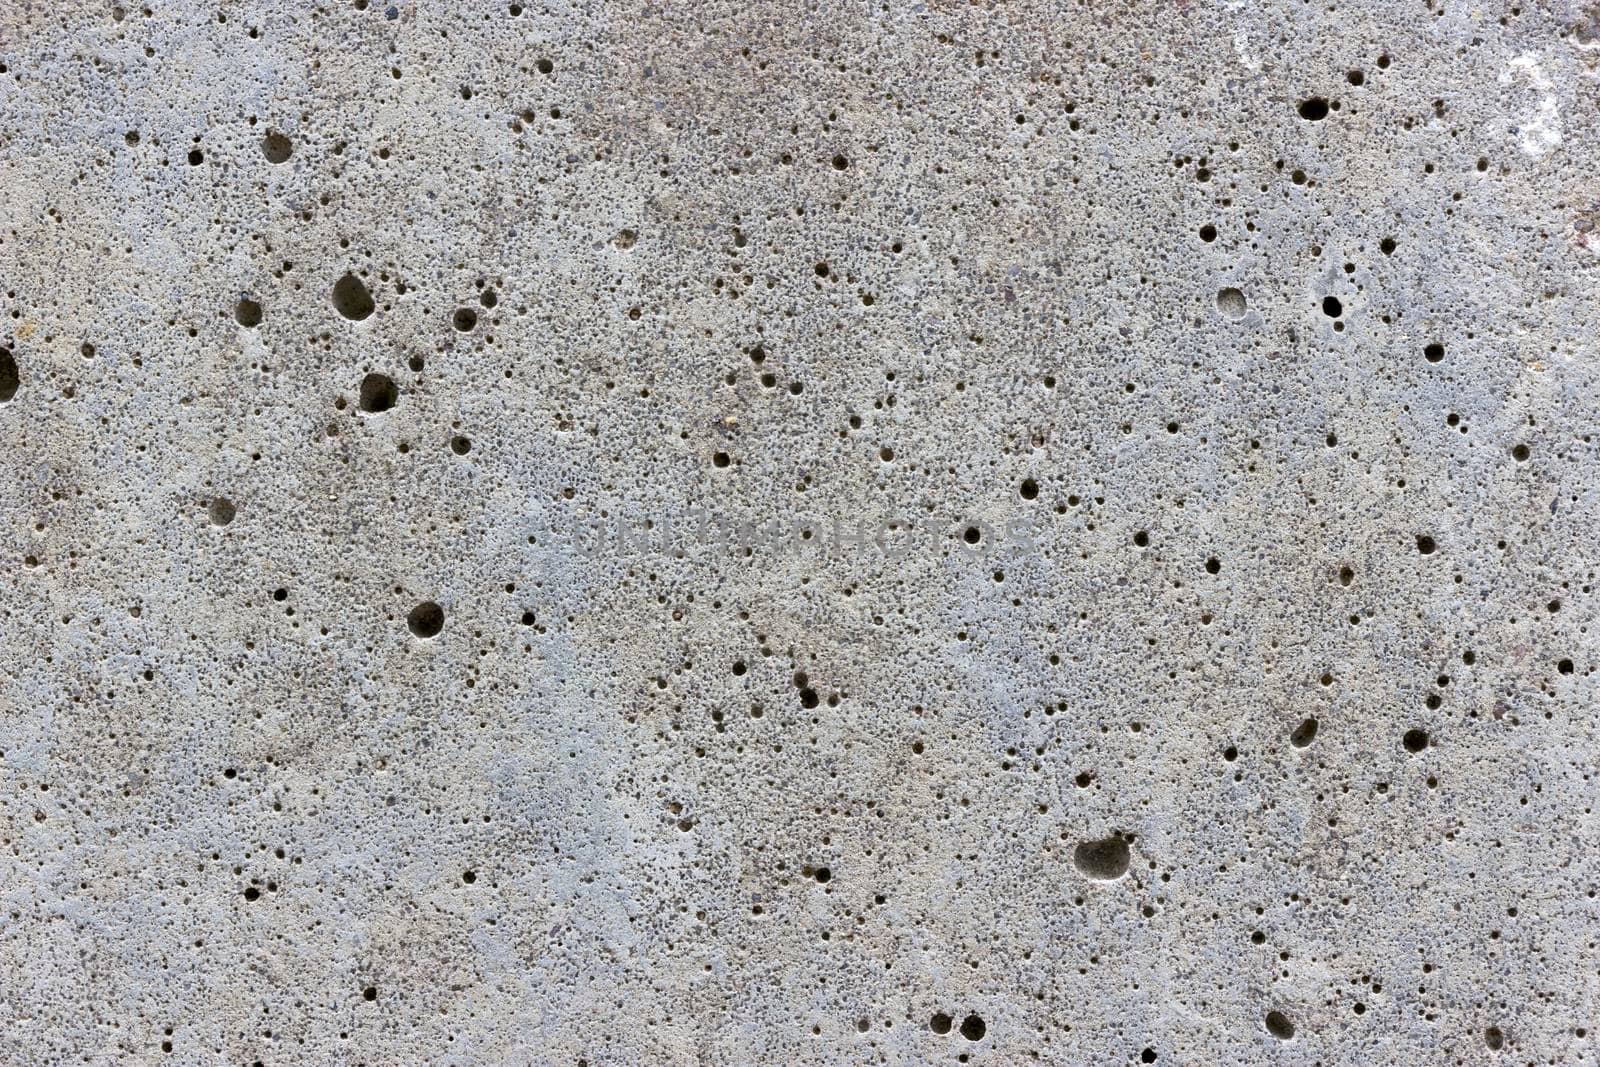 A flat grey concrete surface. The surface is textured and covered in holes from lots of tiny air bubbles.